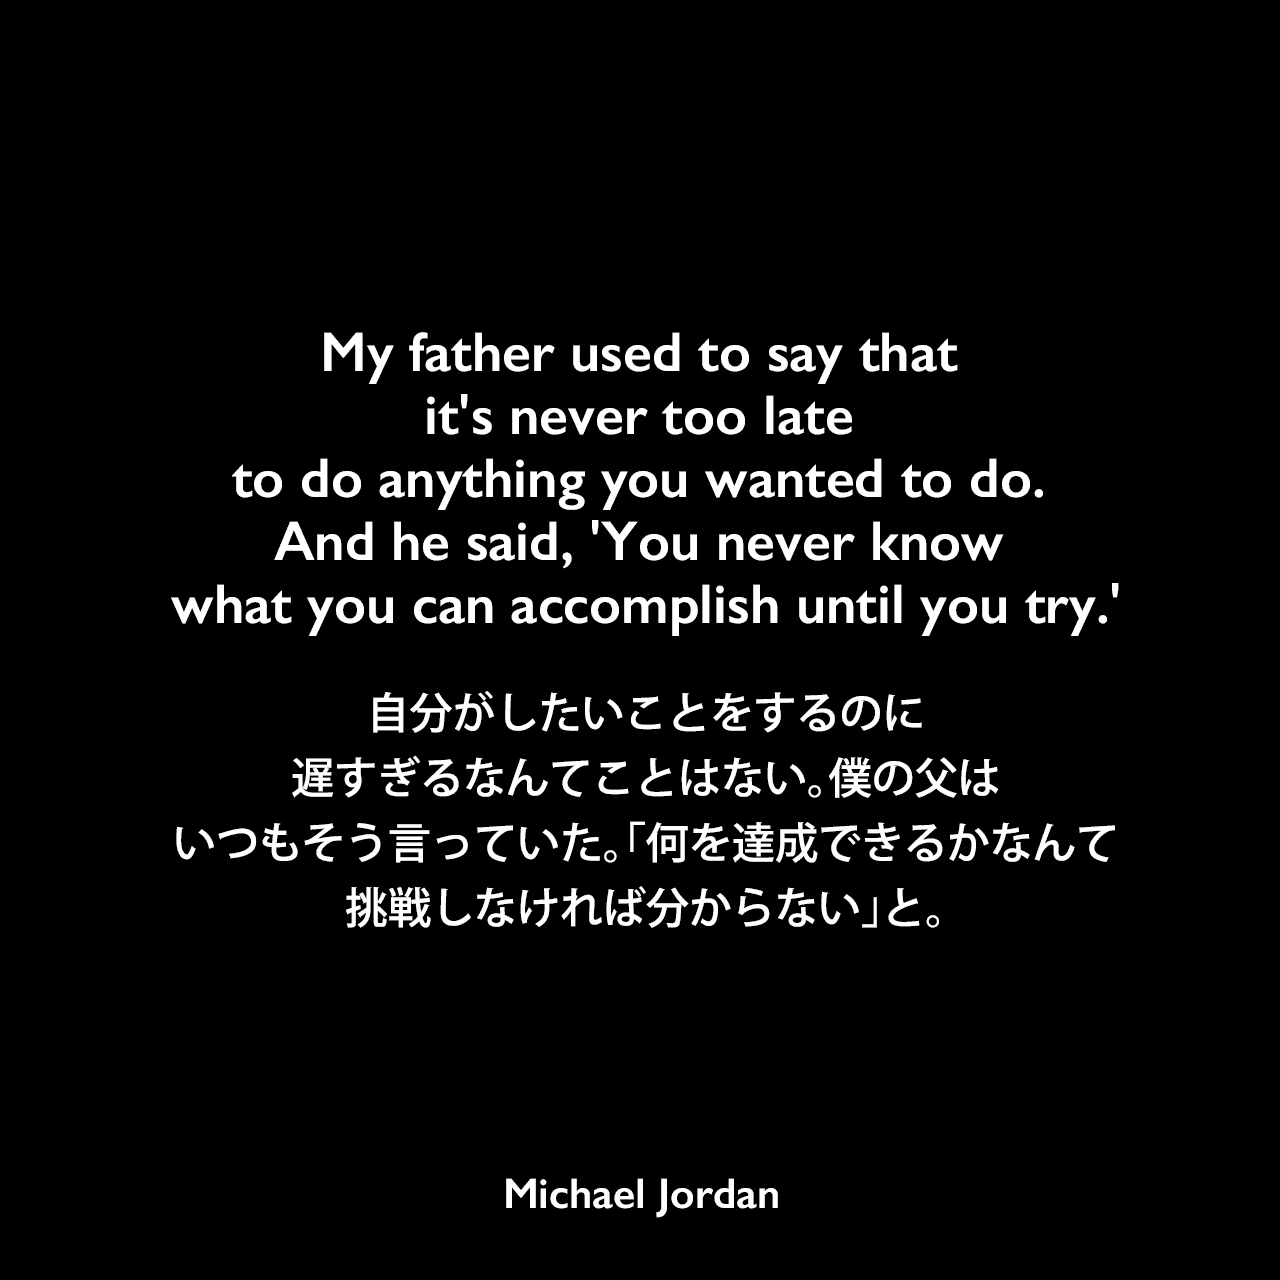 My father used to say that it's never too late to do anything you wanted to do. And he said, 'You never know what you can accomplish until you try.'自分がしたいことをするのに、遅すぎるなんてことはない。僕の父は、いつもそう言っていた。「何を達成できるかなんて、挑戦しなければ分からない」と。Michael Jordan